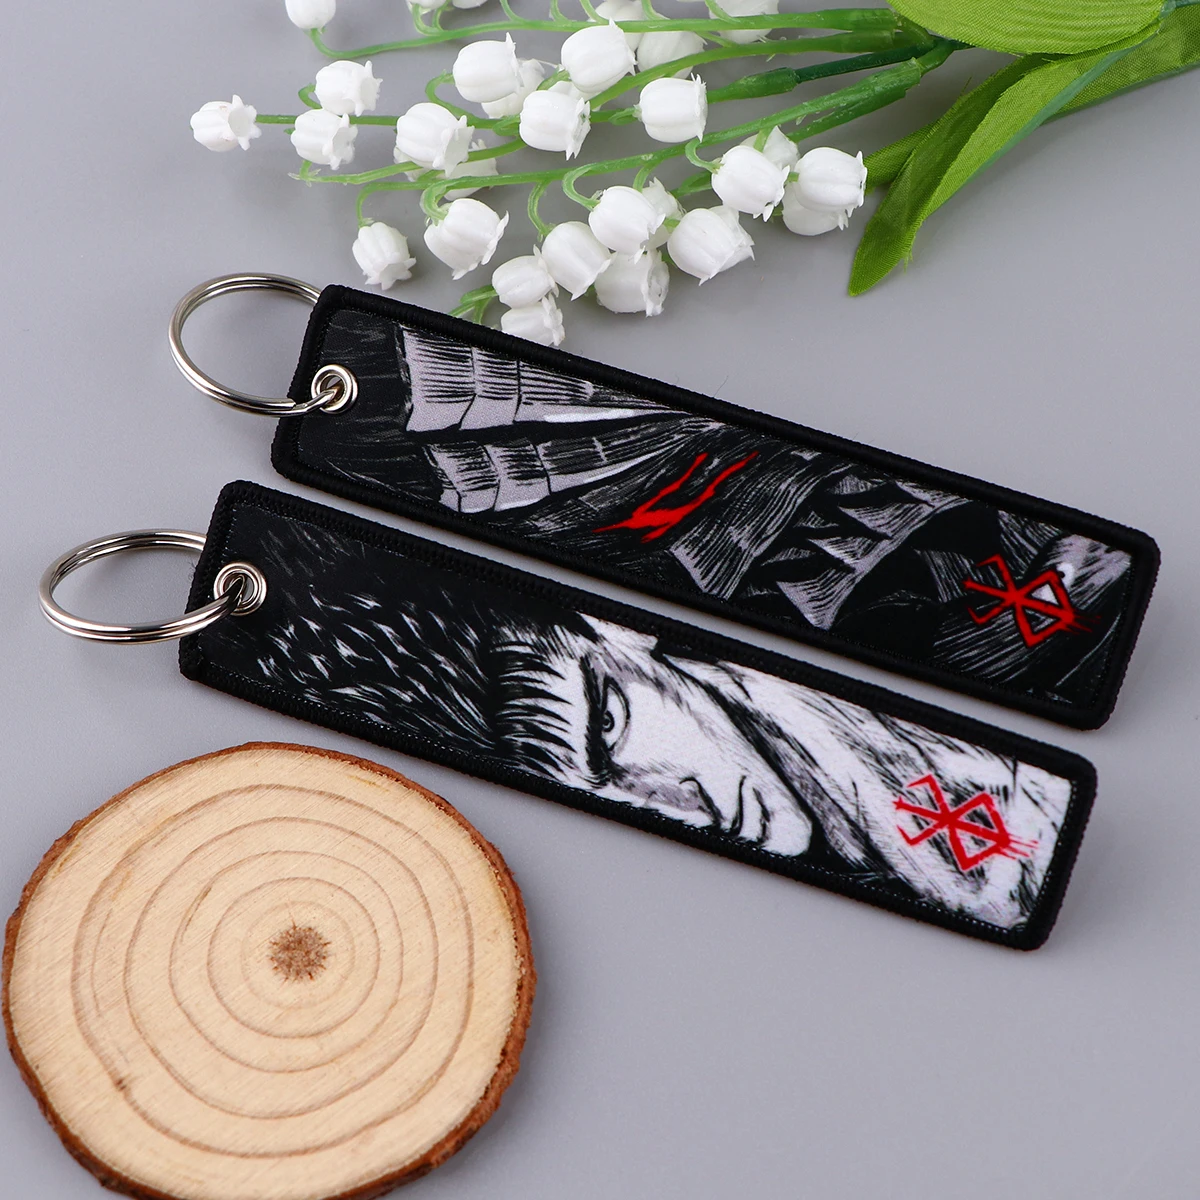 Japanese Anime Embroidery Key Fobs Manga Keychains for Women Car Key Chains Keyring Accessories Backpack Pendant Chain